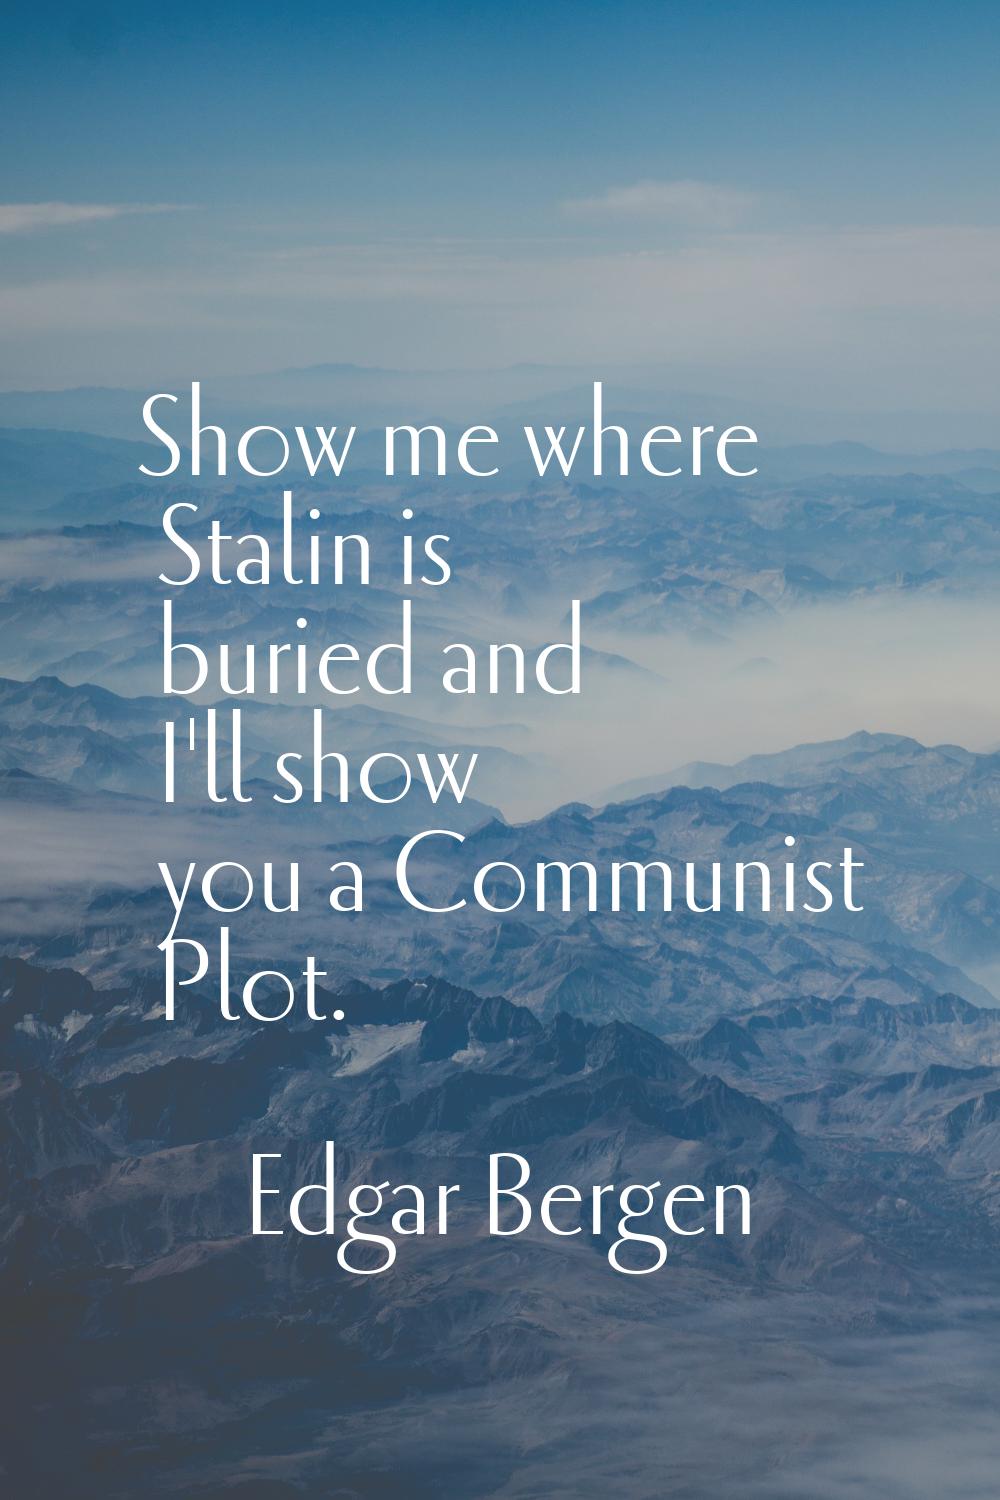 Show me where Stalin is buried and I'll show you a Communist Plot.